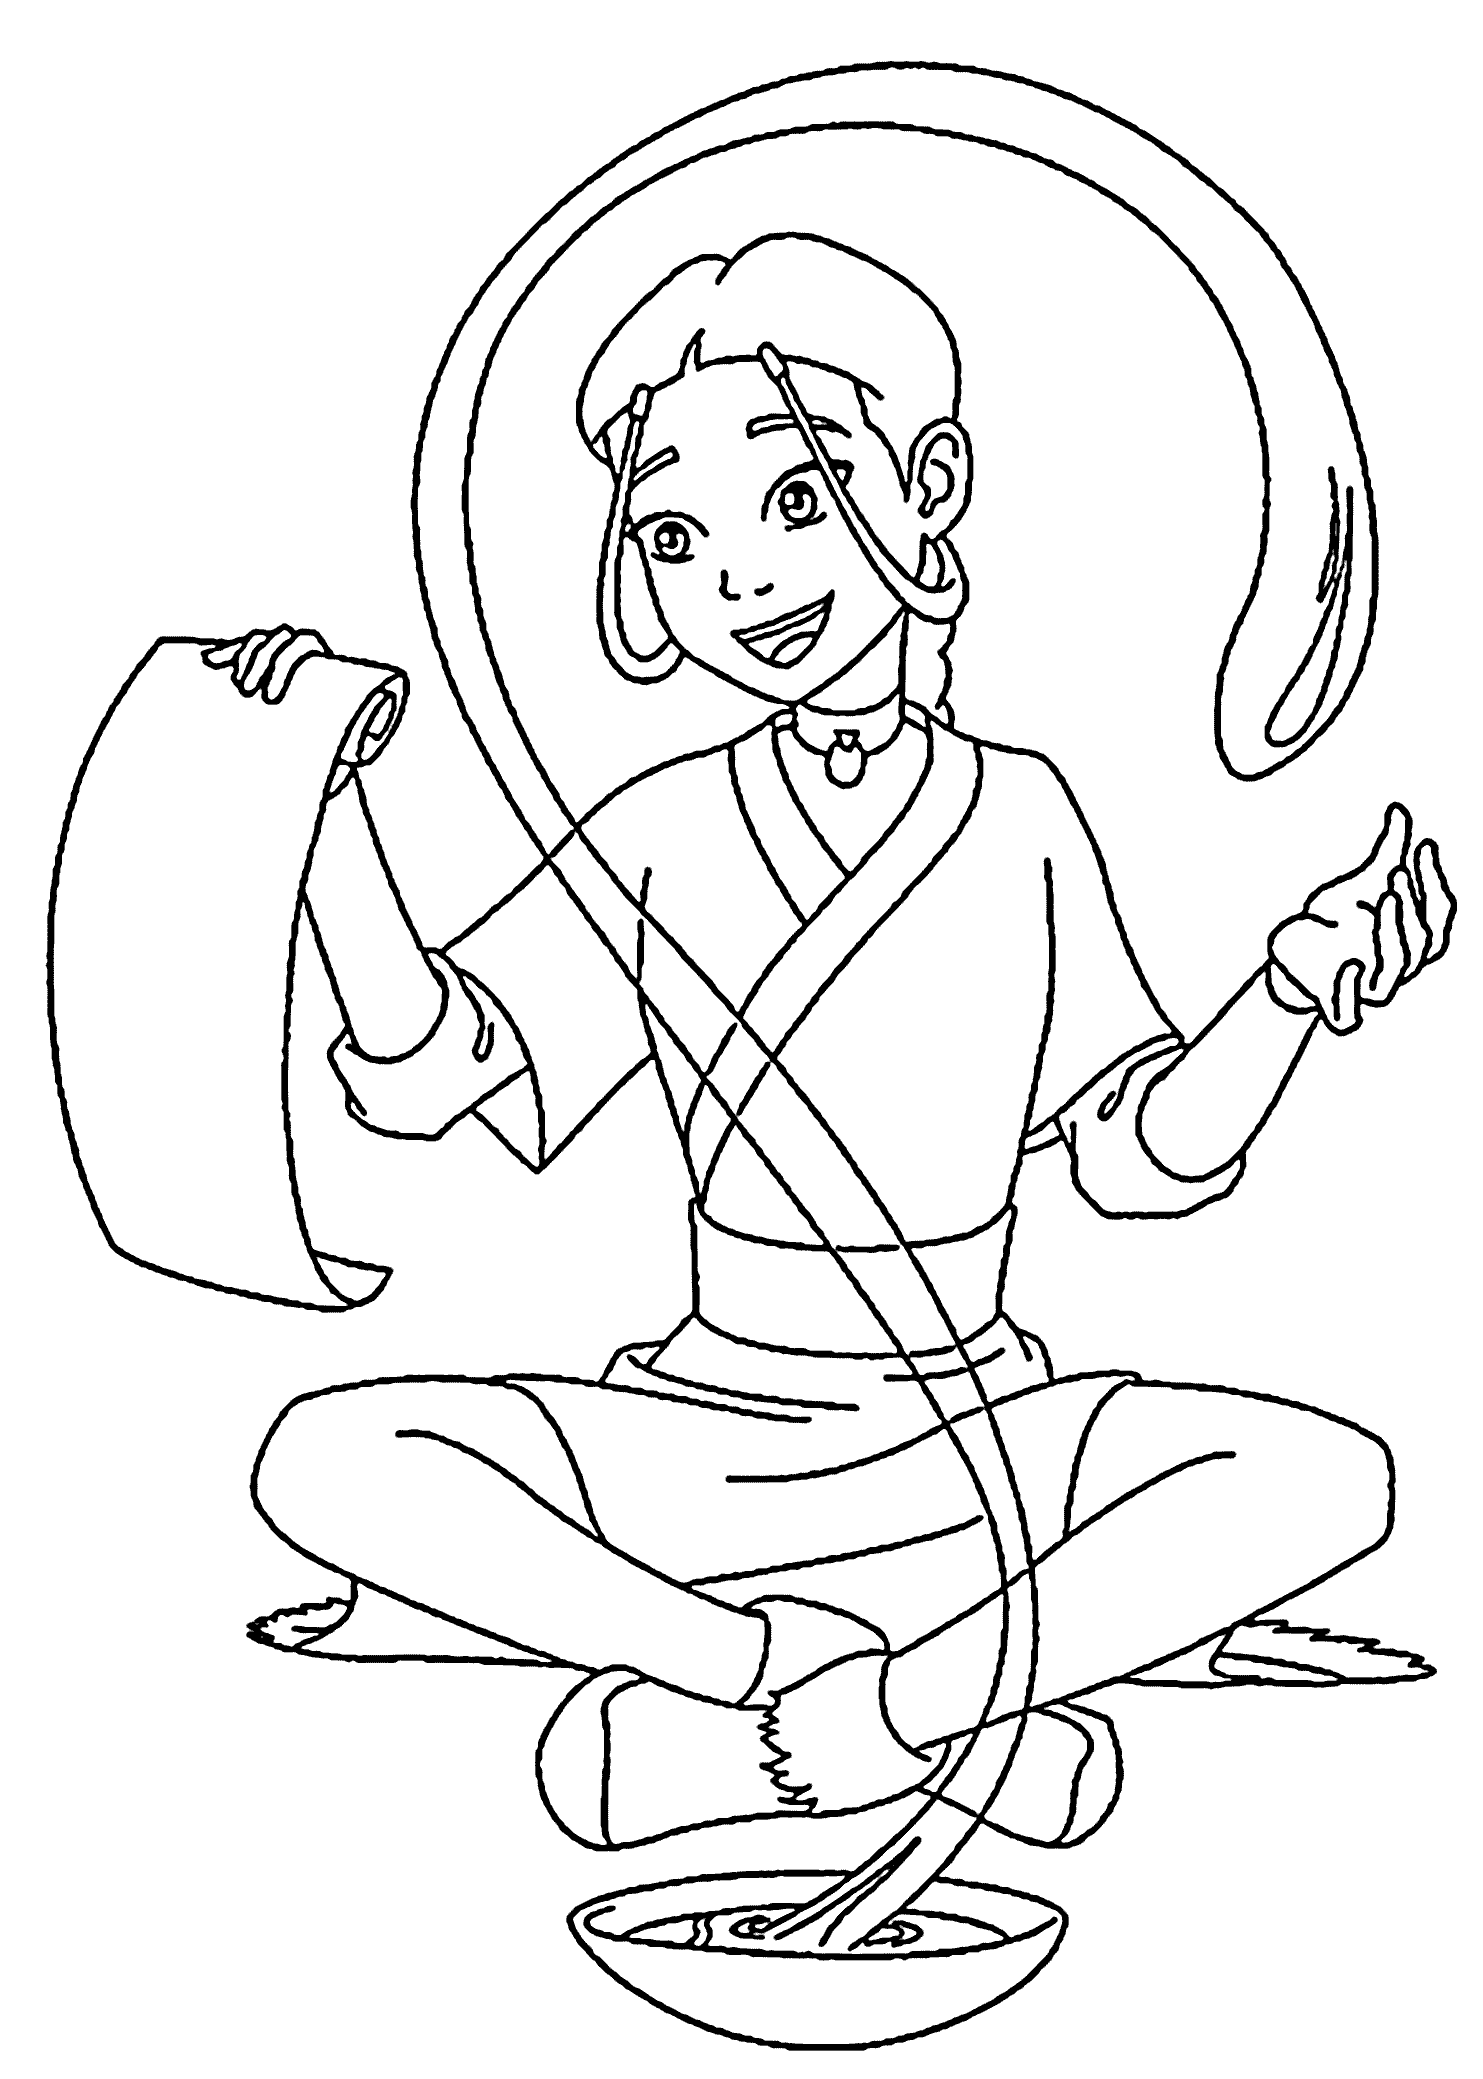 Airbender From The Legend Of Korra Coloring Pages For Kids Printable Free The Legend